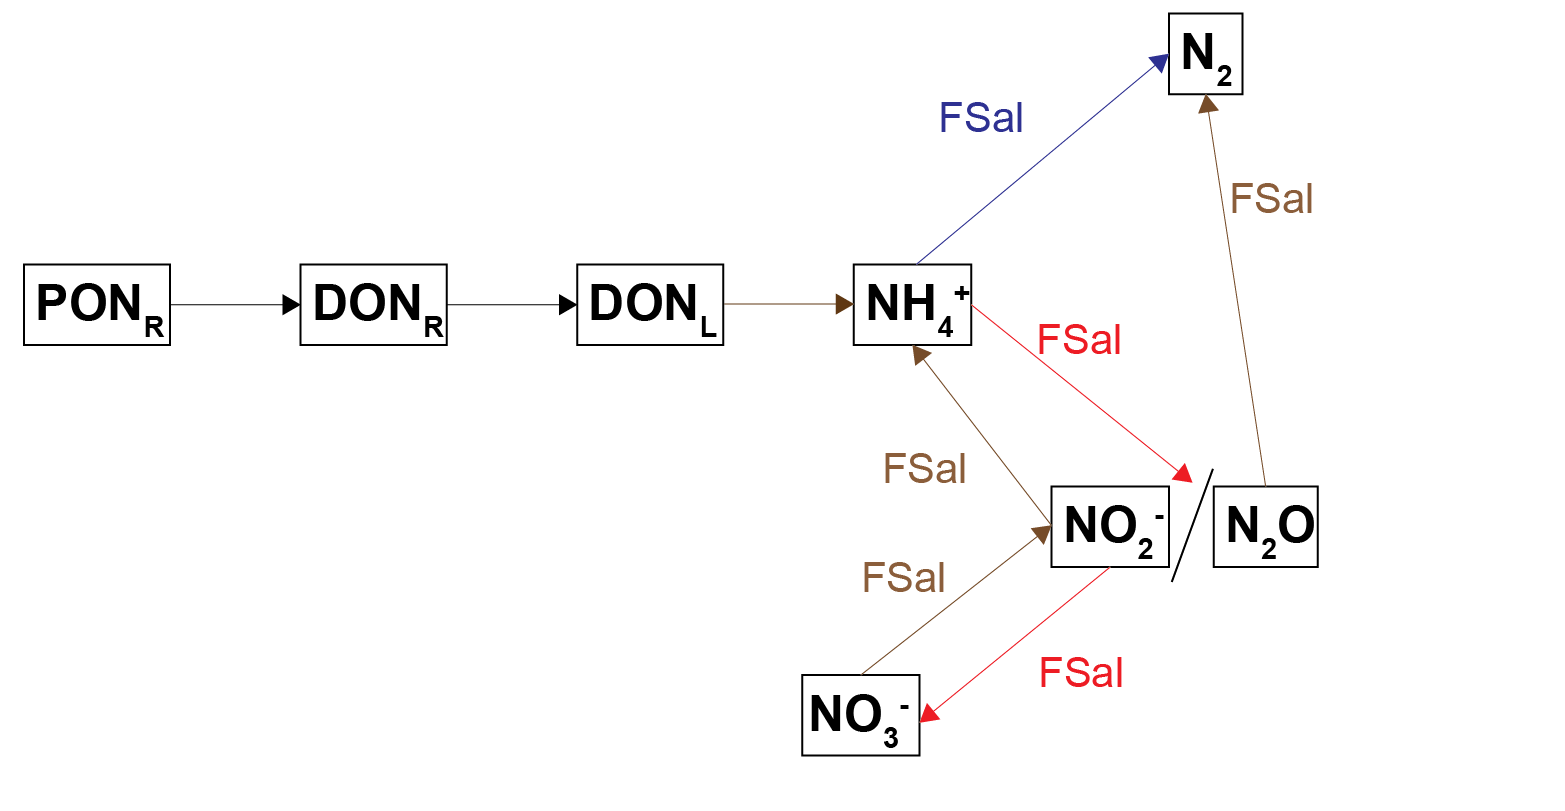 Schematic of the nitrogen breakdown pathways from $PON_R$ to $N_2$. PONL was not included in this diagram in order to simplify it, and because PONR was the major PON pool. The salinity inhibition factor, $F_{Sal}$, was applied to those processes where $F_{Sal}$ is beside the arrow.